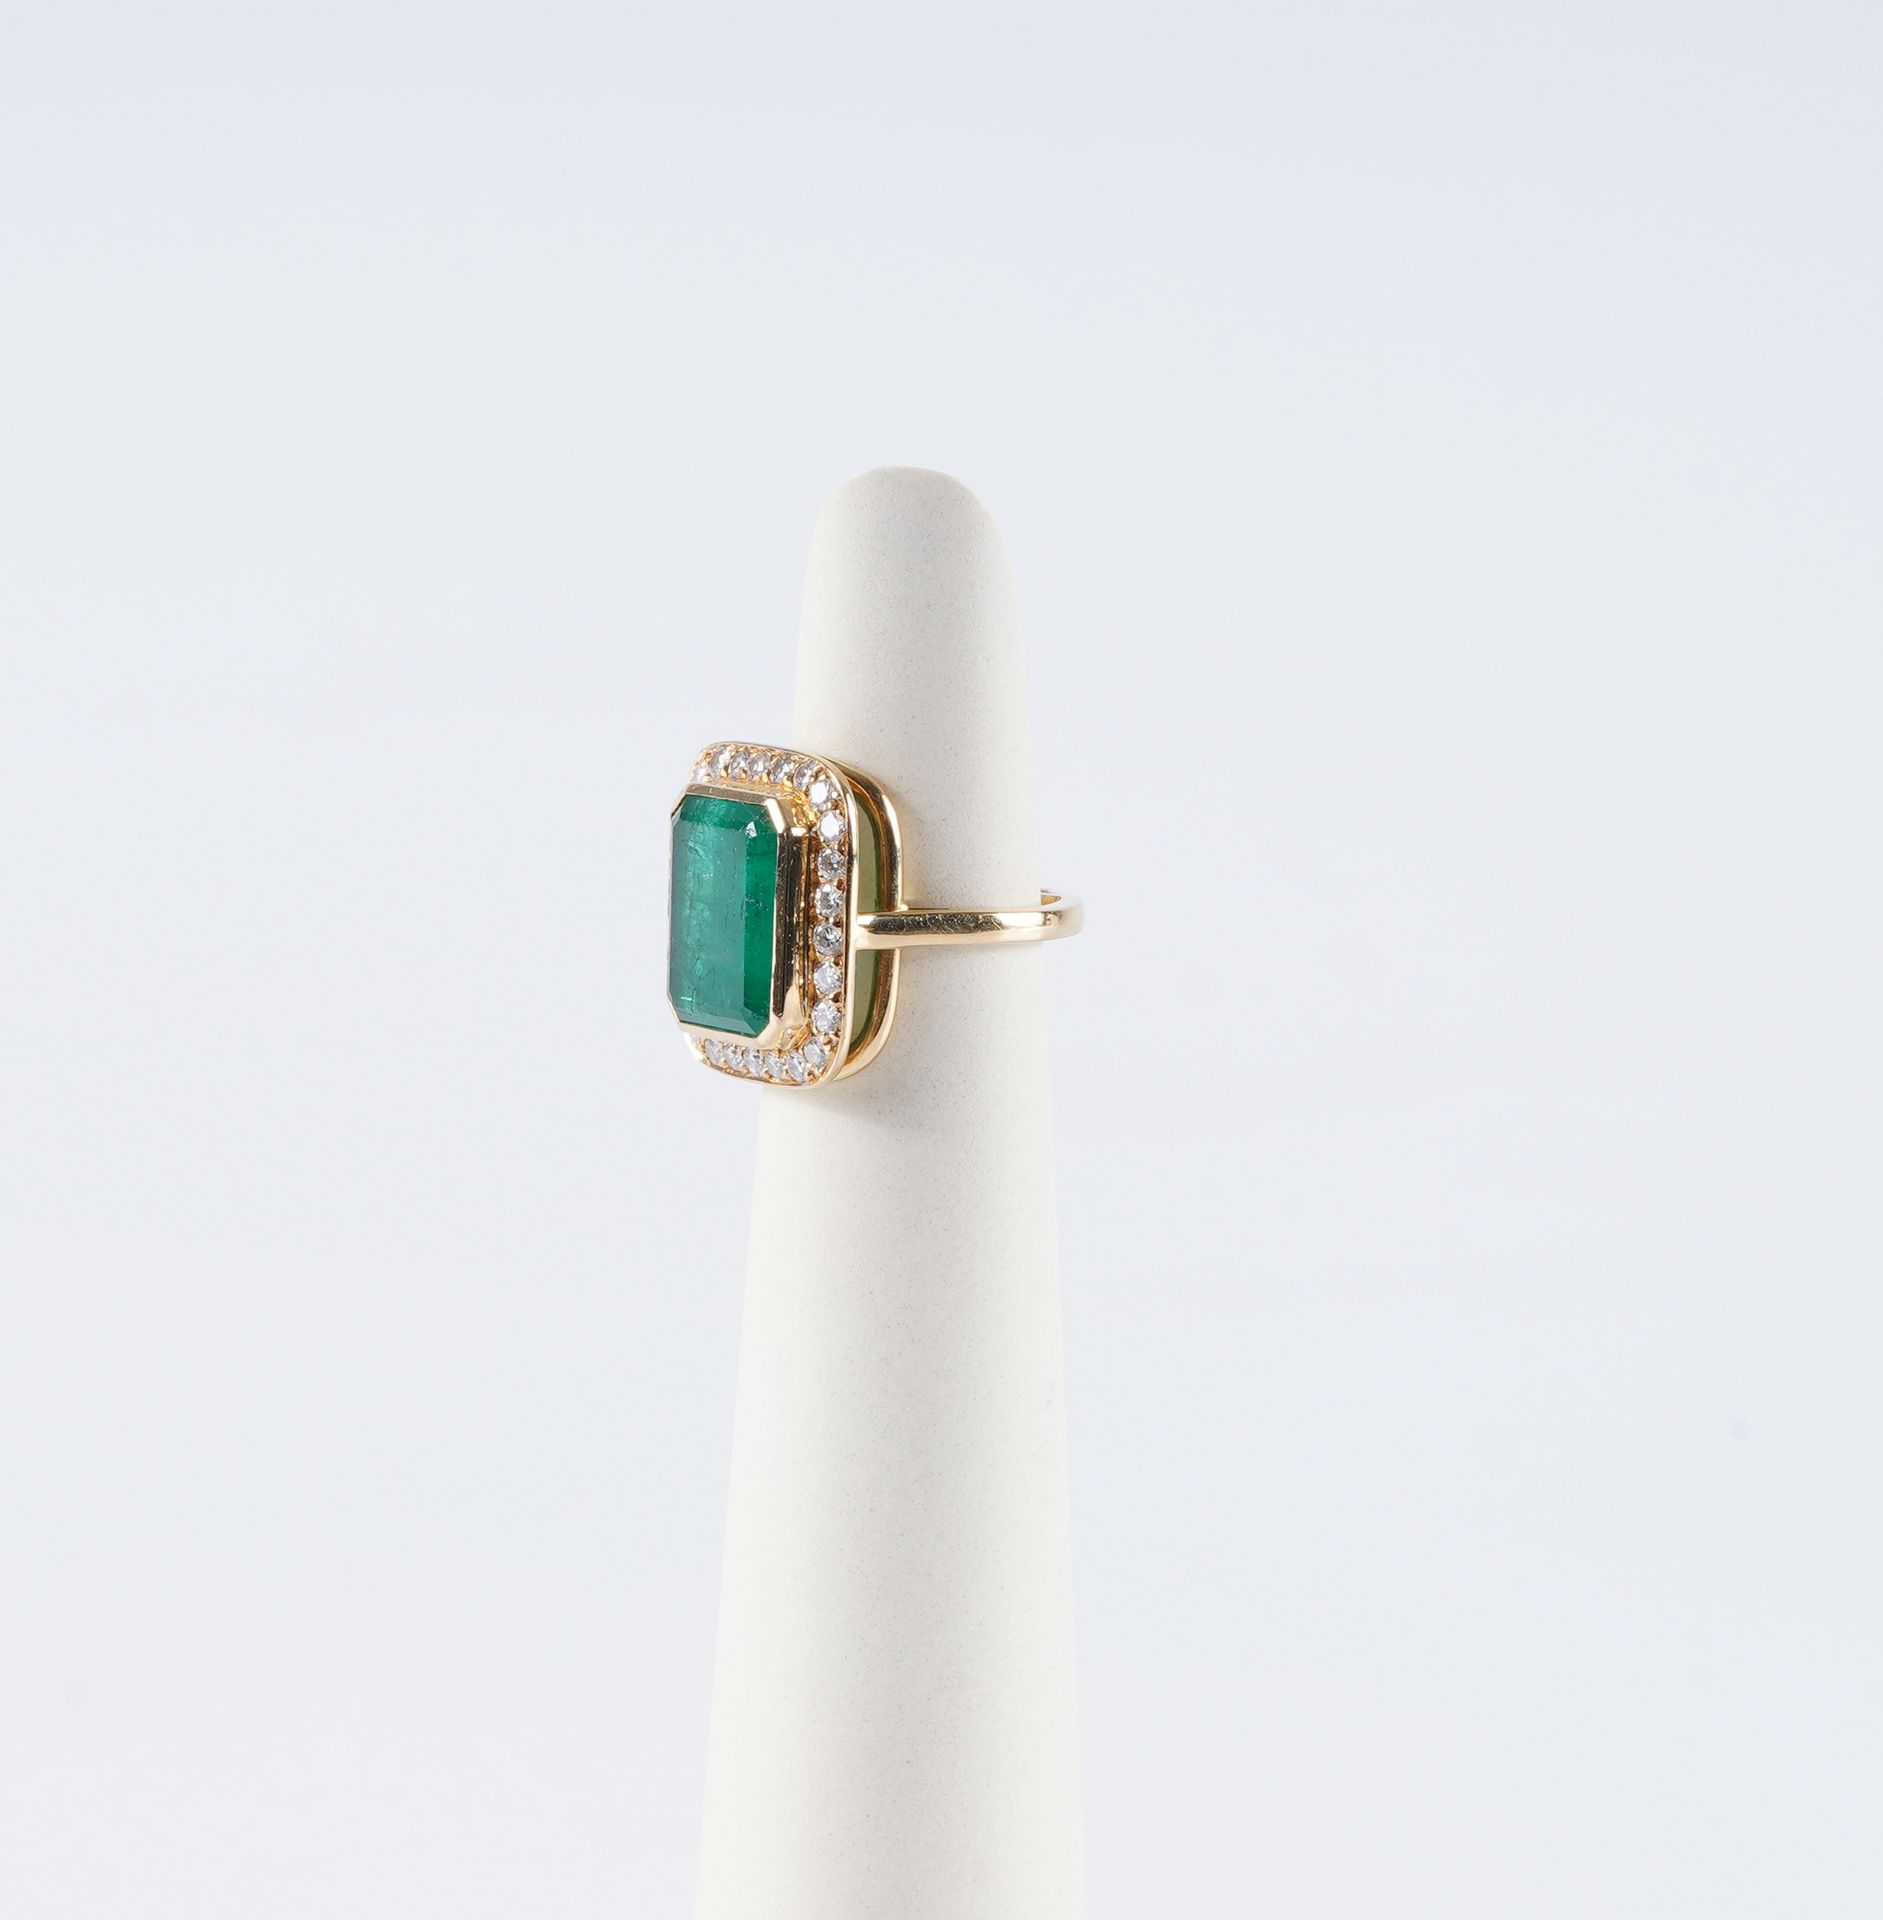 Bague en or et émeraude Ring in 18ct gold and Emerald (probably from Colombia) o&hellip;